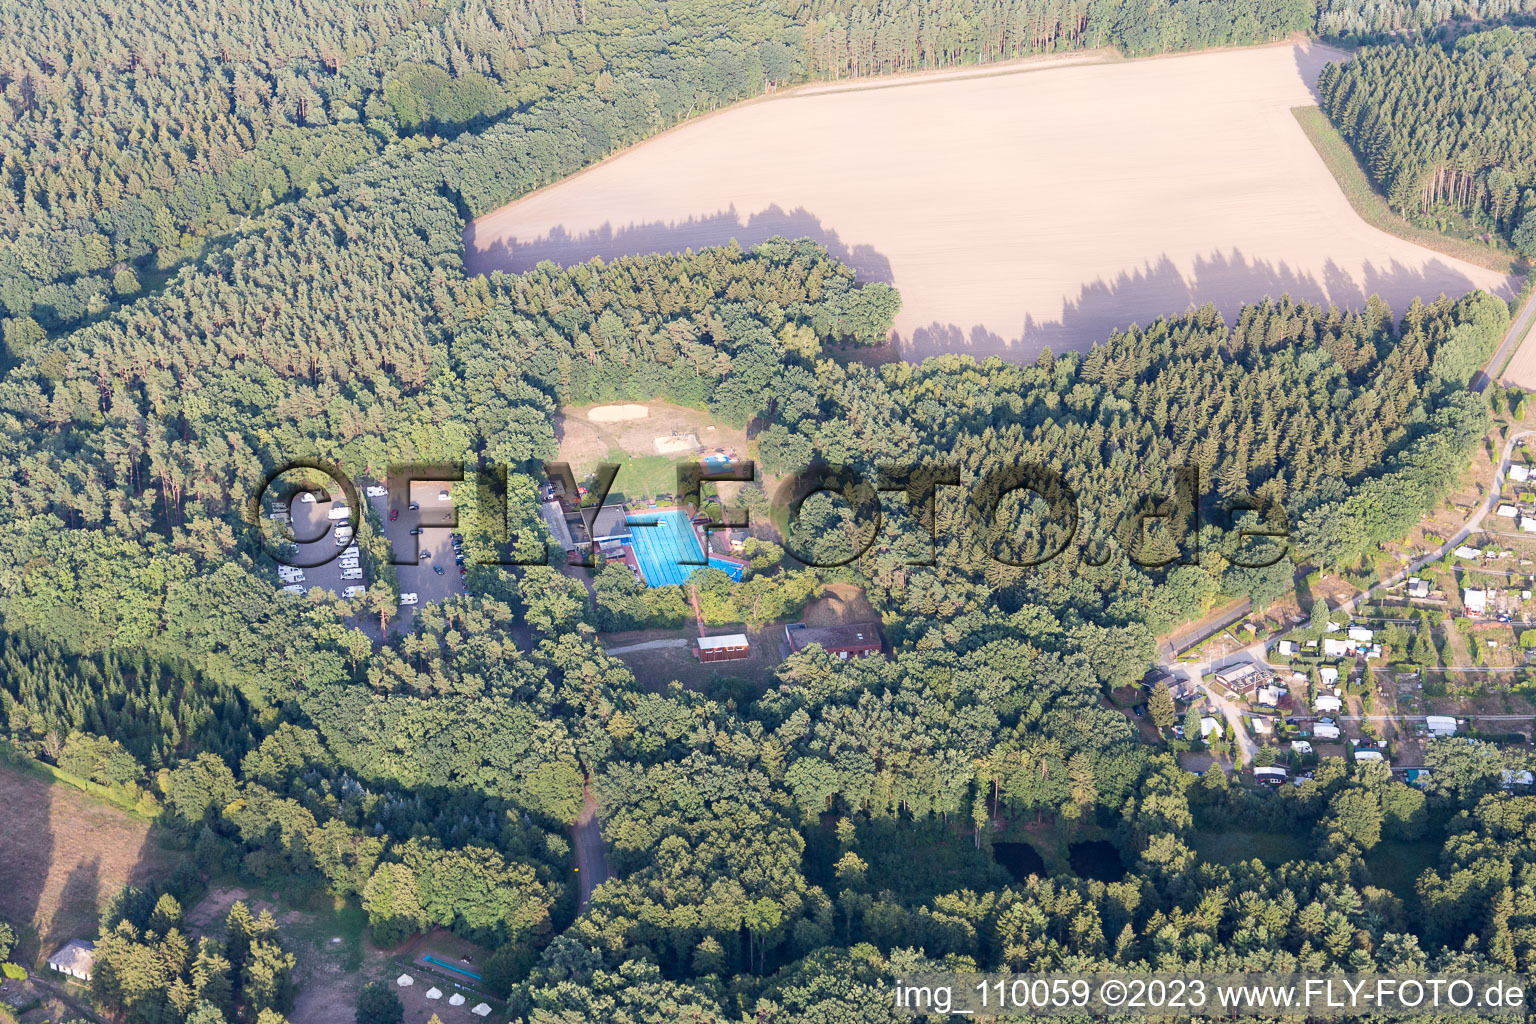 Aerial view of Campsite in Amelinghausen in the state Lower Saxony, Germany